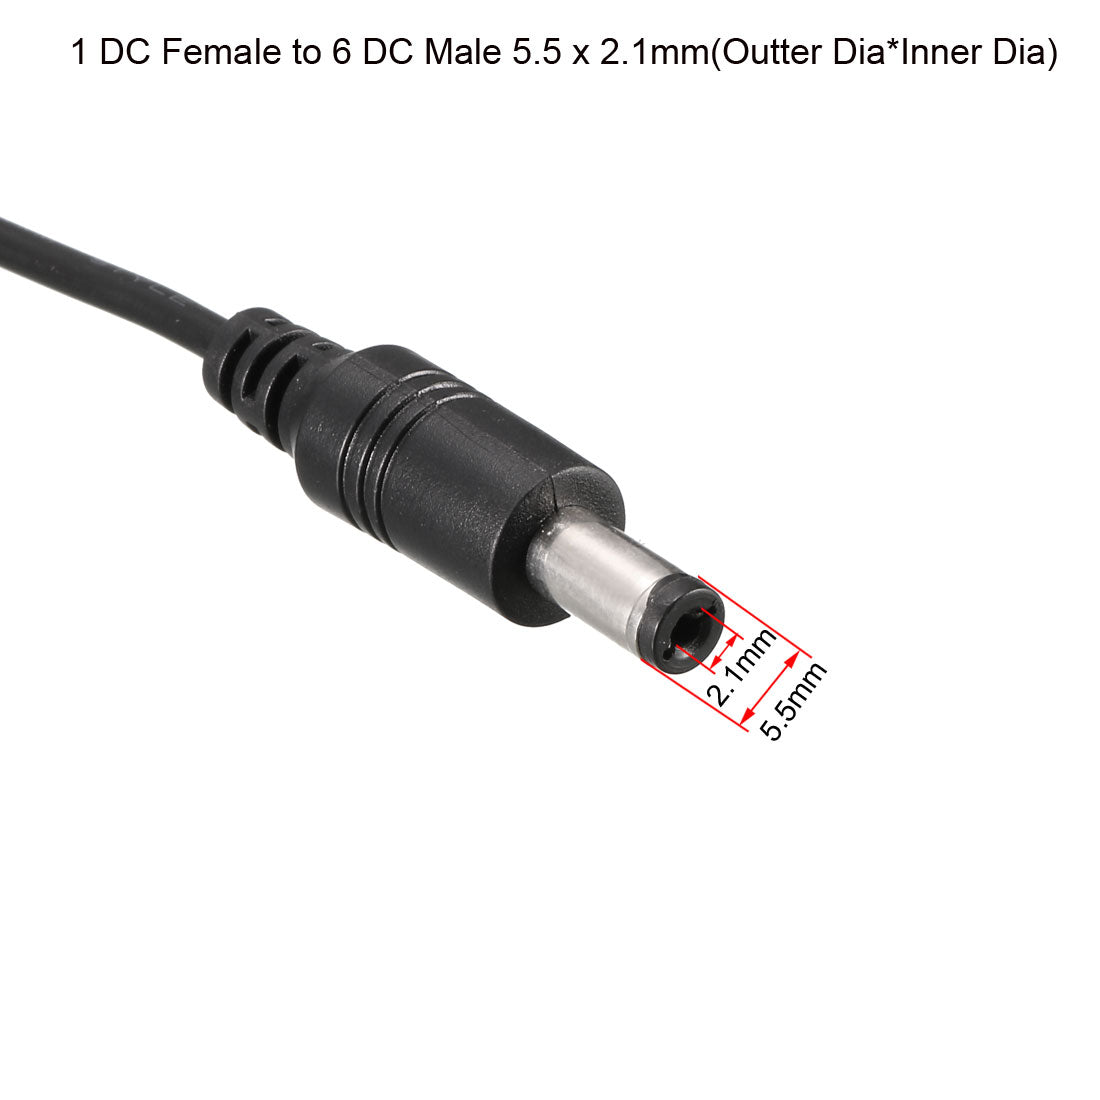 uxcell Uxcell Single DC Female to 6 DC Male 5.5 x 2.1mm Power Extension Wire For CCTV Camera